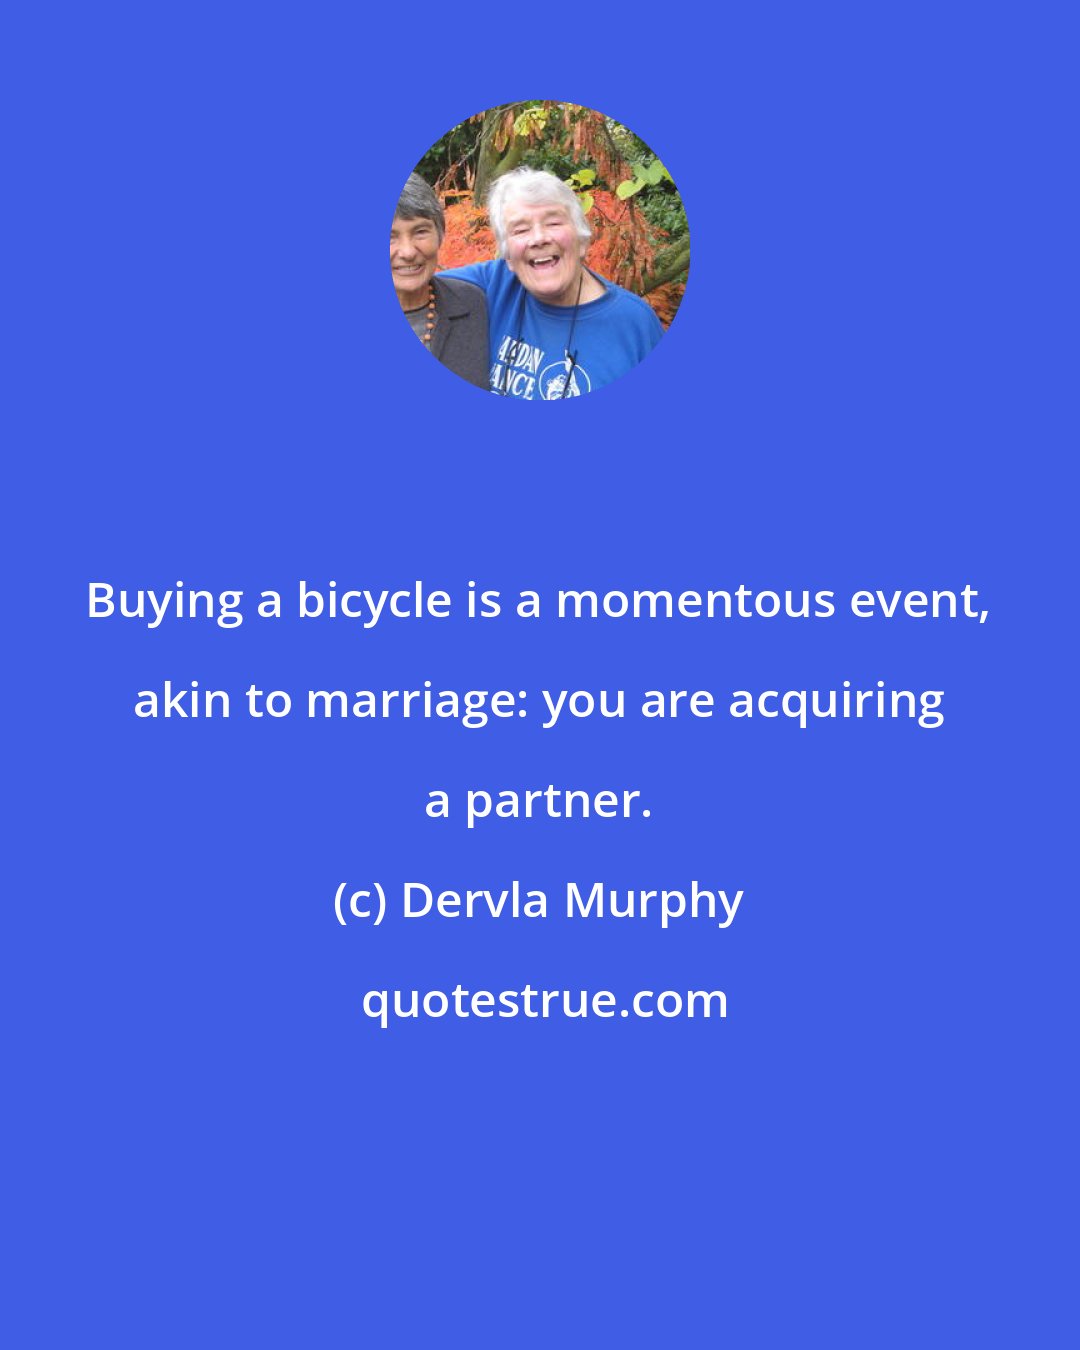 Dervla Murphy: Buying a bicycle is a momentous event, akin to marriage: you are acquiring a partner.